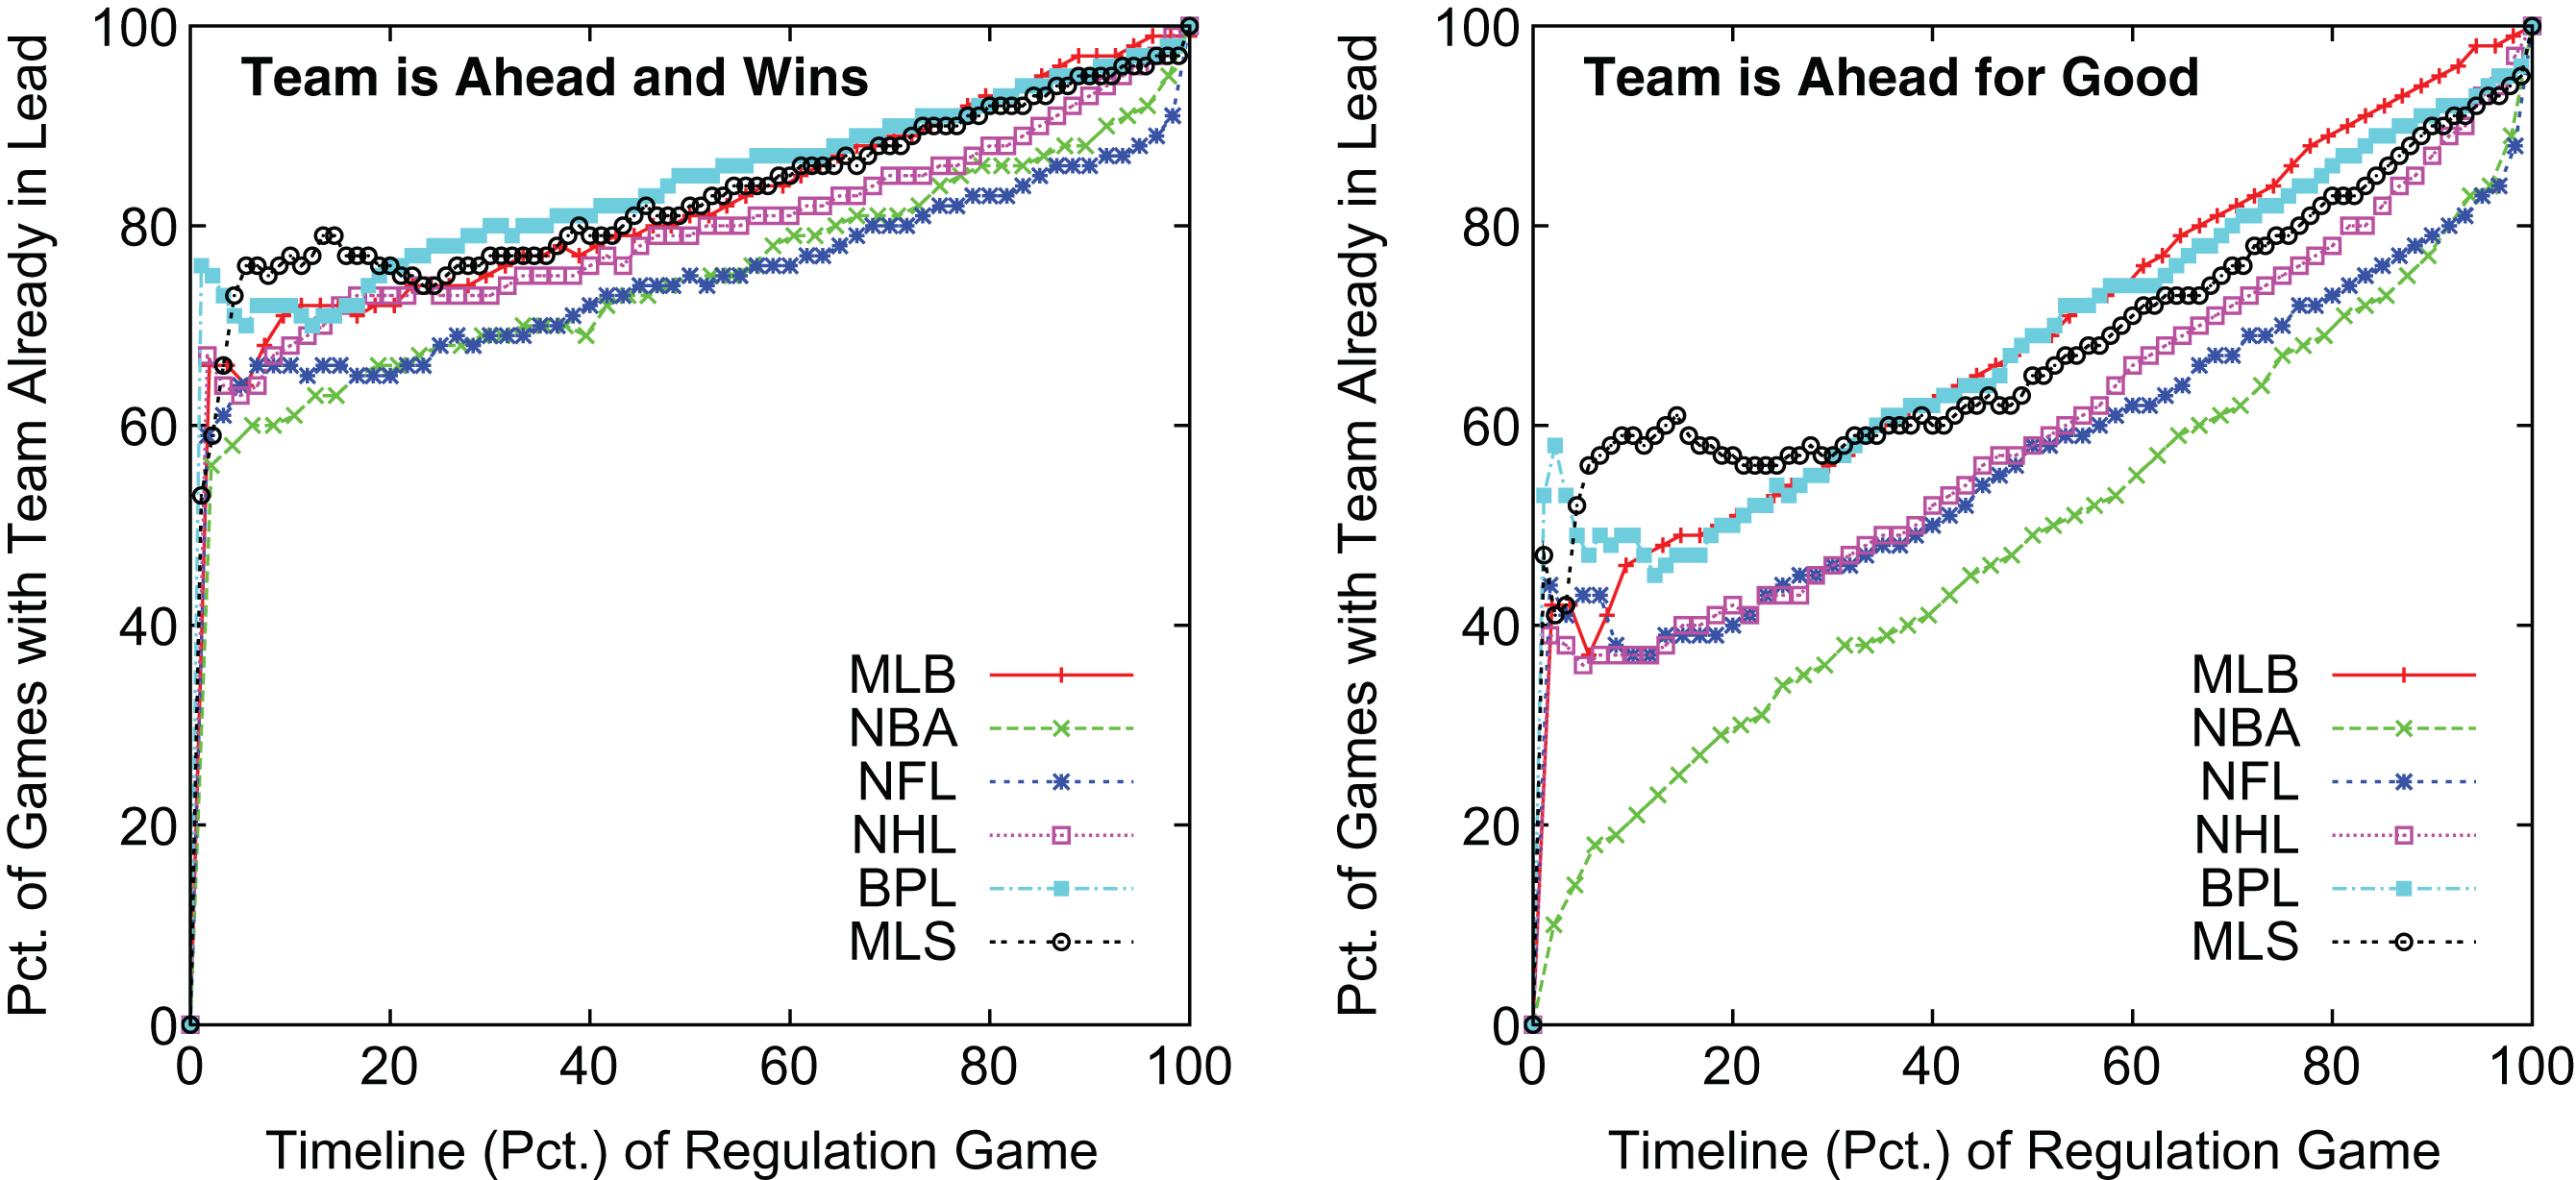 Winning and Ahead-for-Good Percentages 
During Game for Teams with Lead.